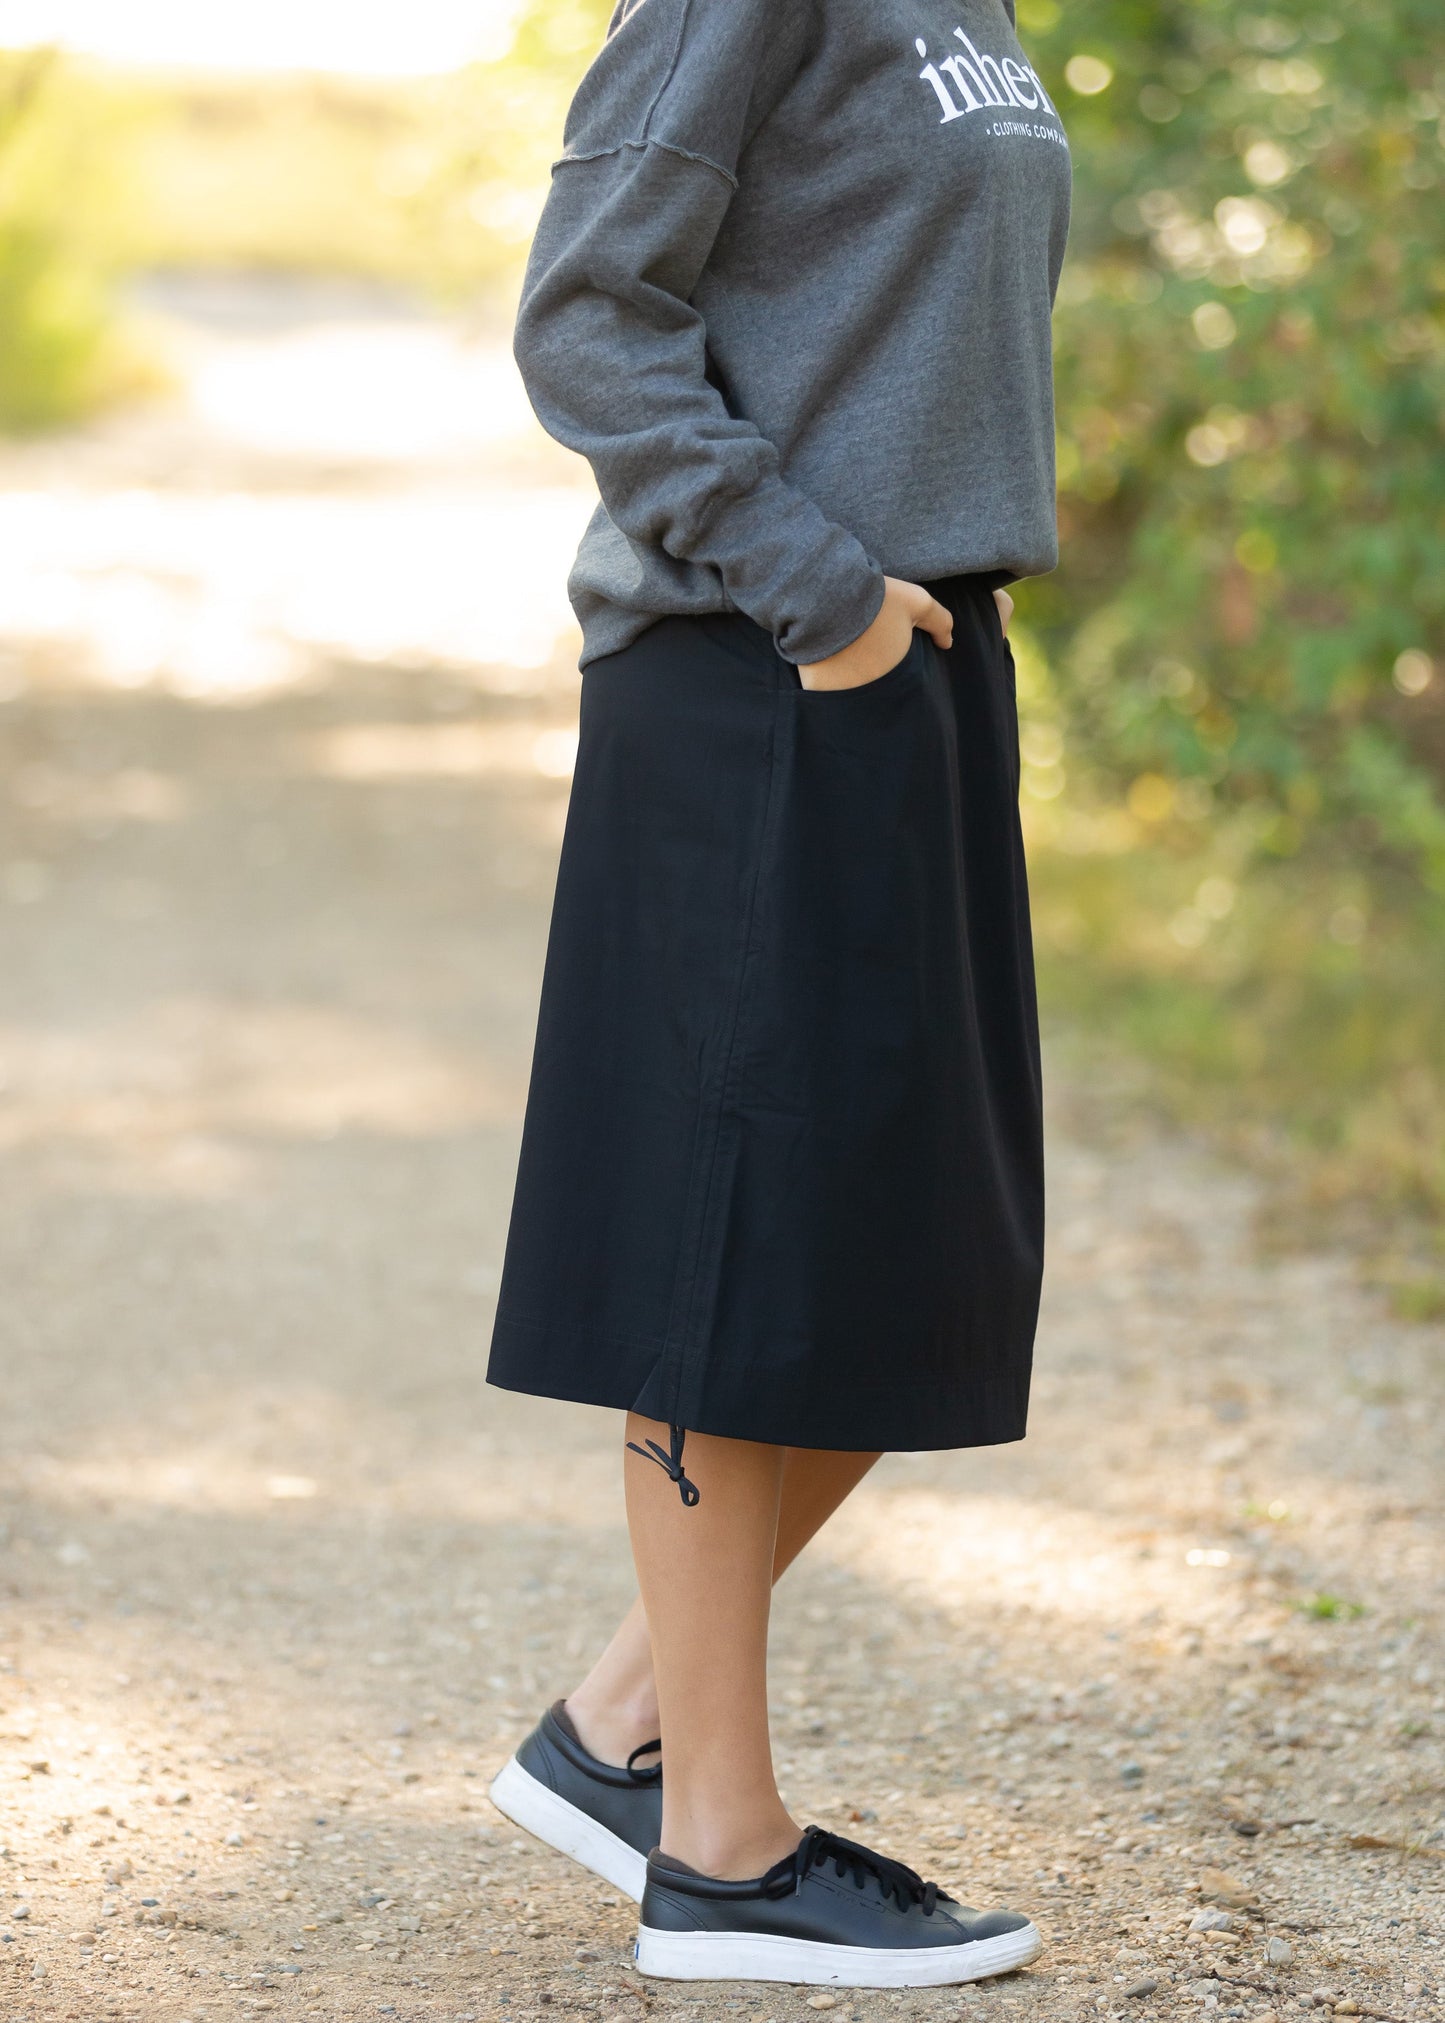 Andie Black Hiking Midi Skirt is a black athletic style midi length skirt with side pockets, a stretch waist, and draw strings at the hem.